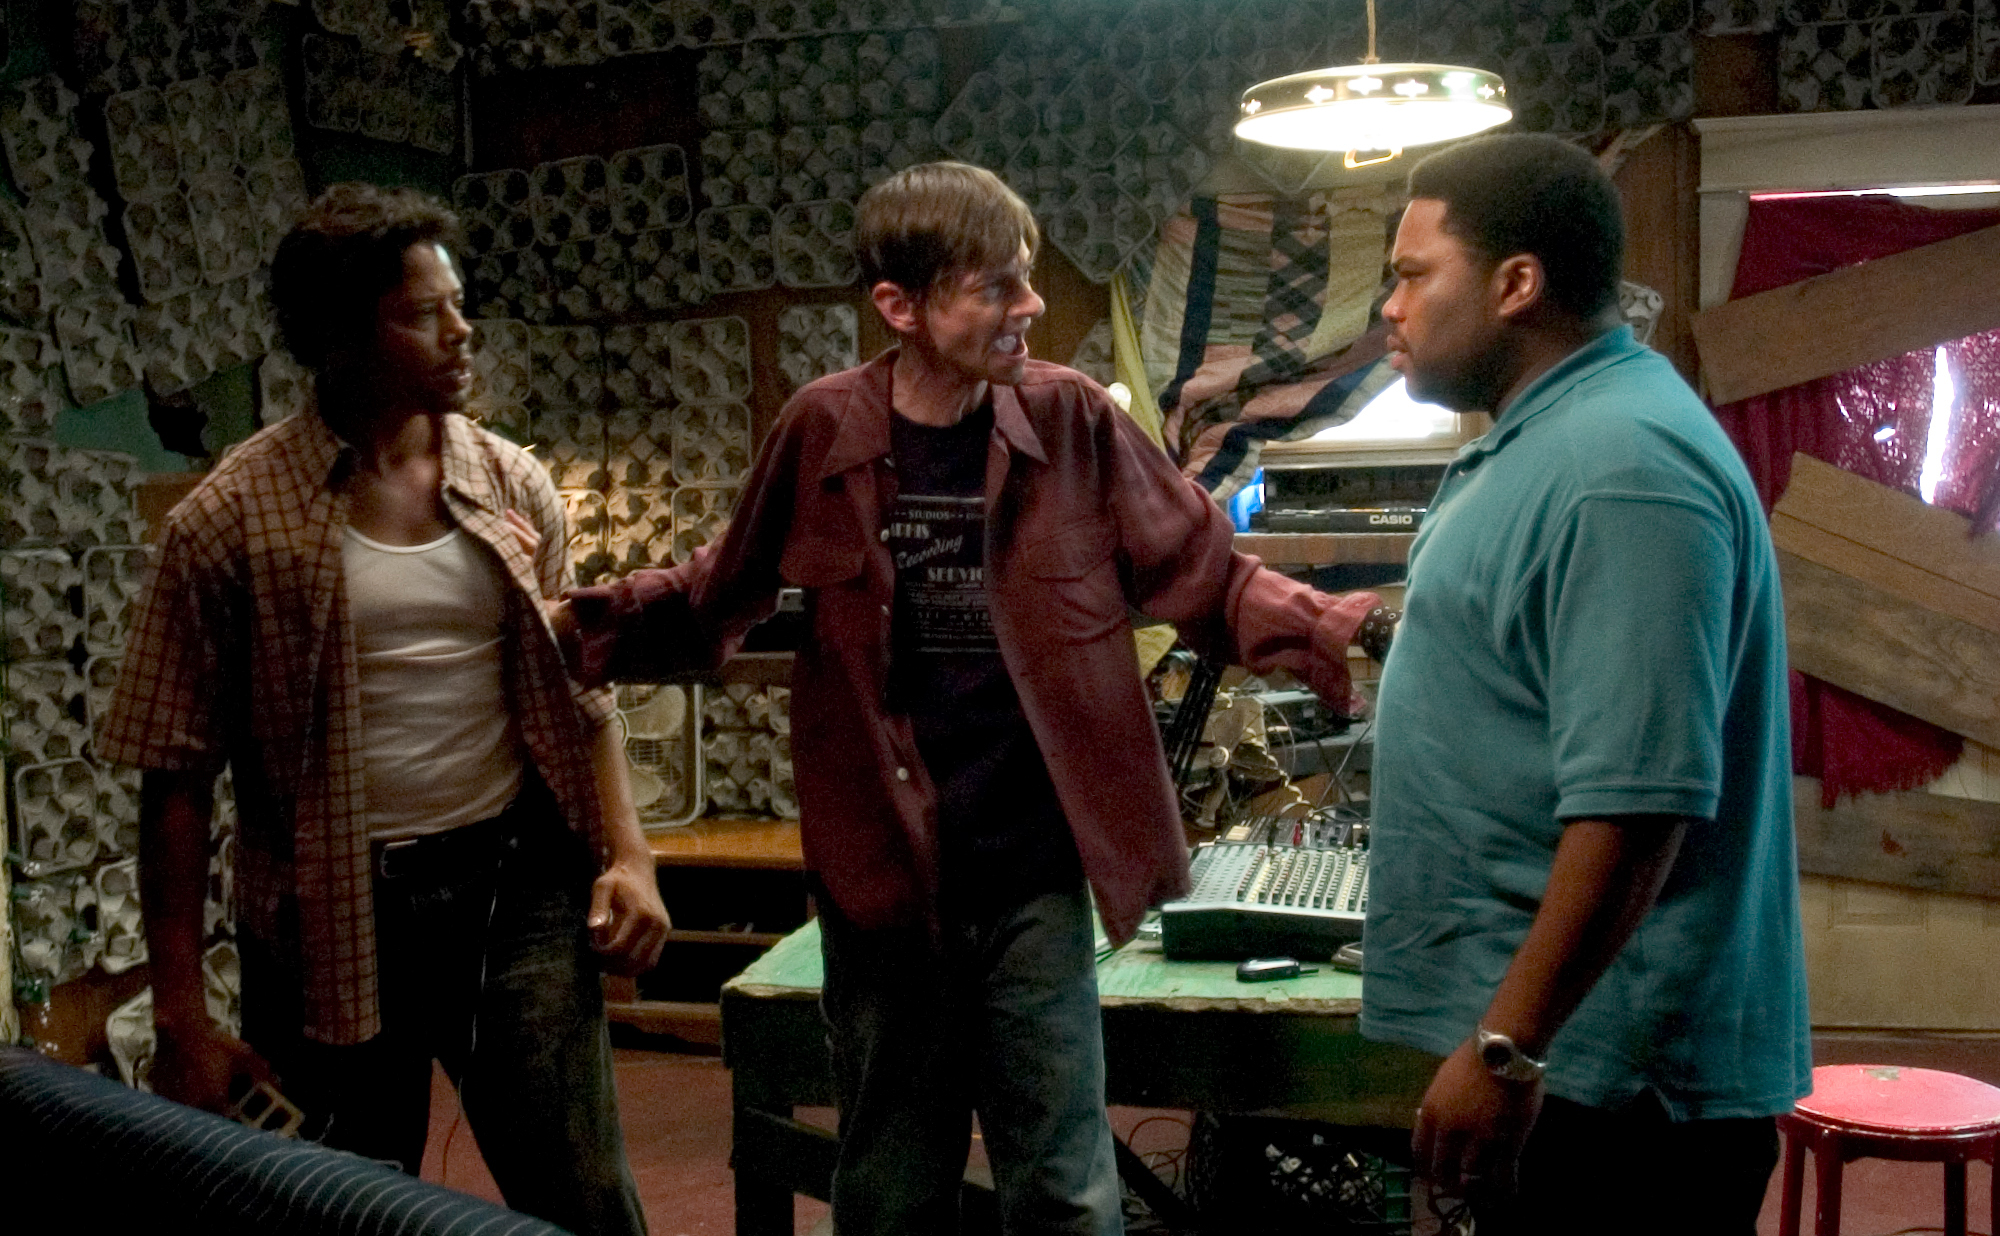 Still of Terrence Howard, Anthony Anderson and DJ Qualls in Hustle & Flow (2005)